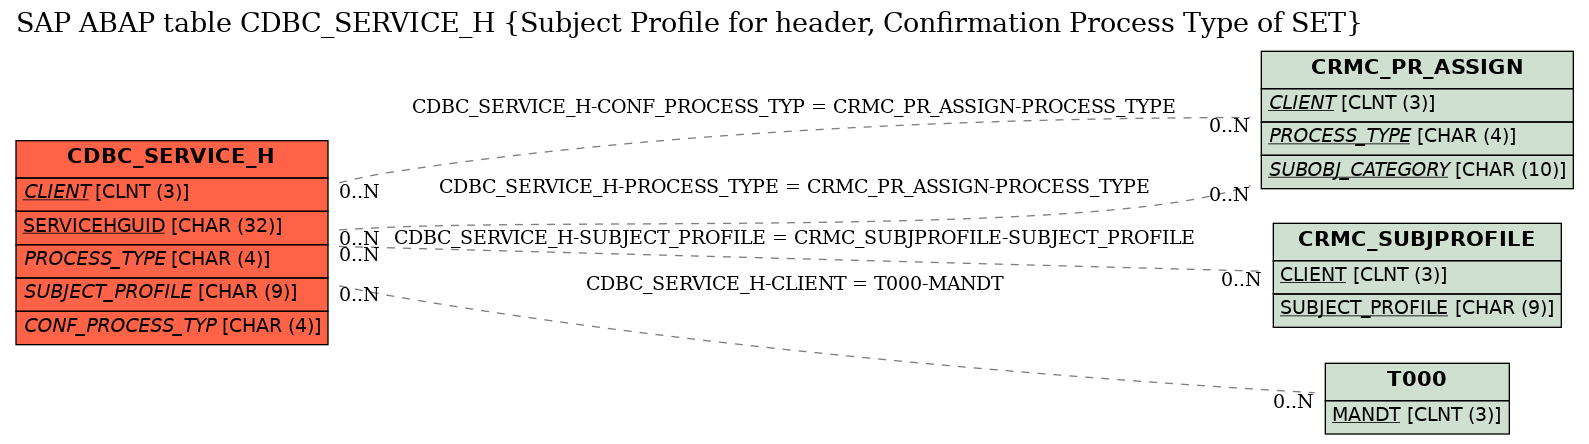 E-R Diagram for table CDBC_SERVICE_H (Subject Profile for header, Confirmation Process Type of SET)